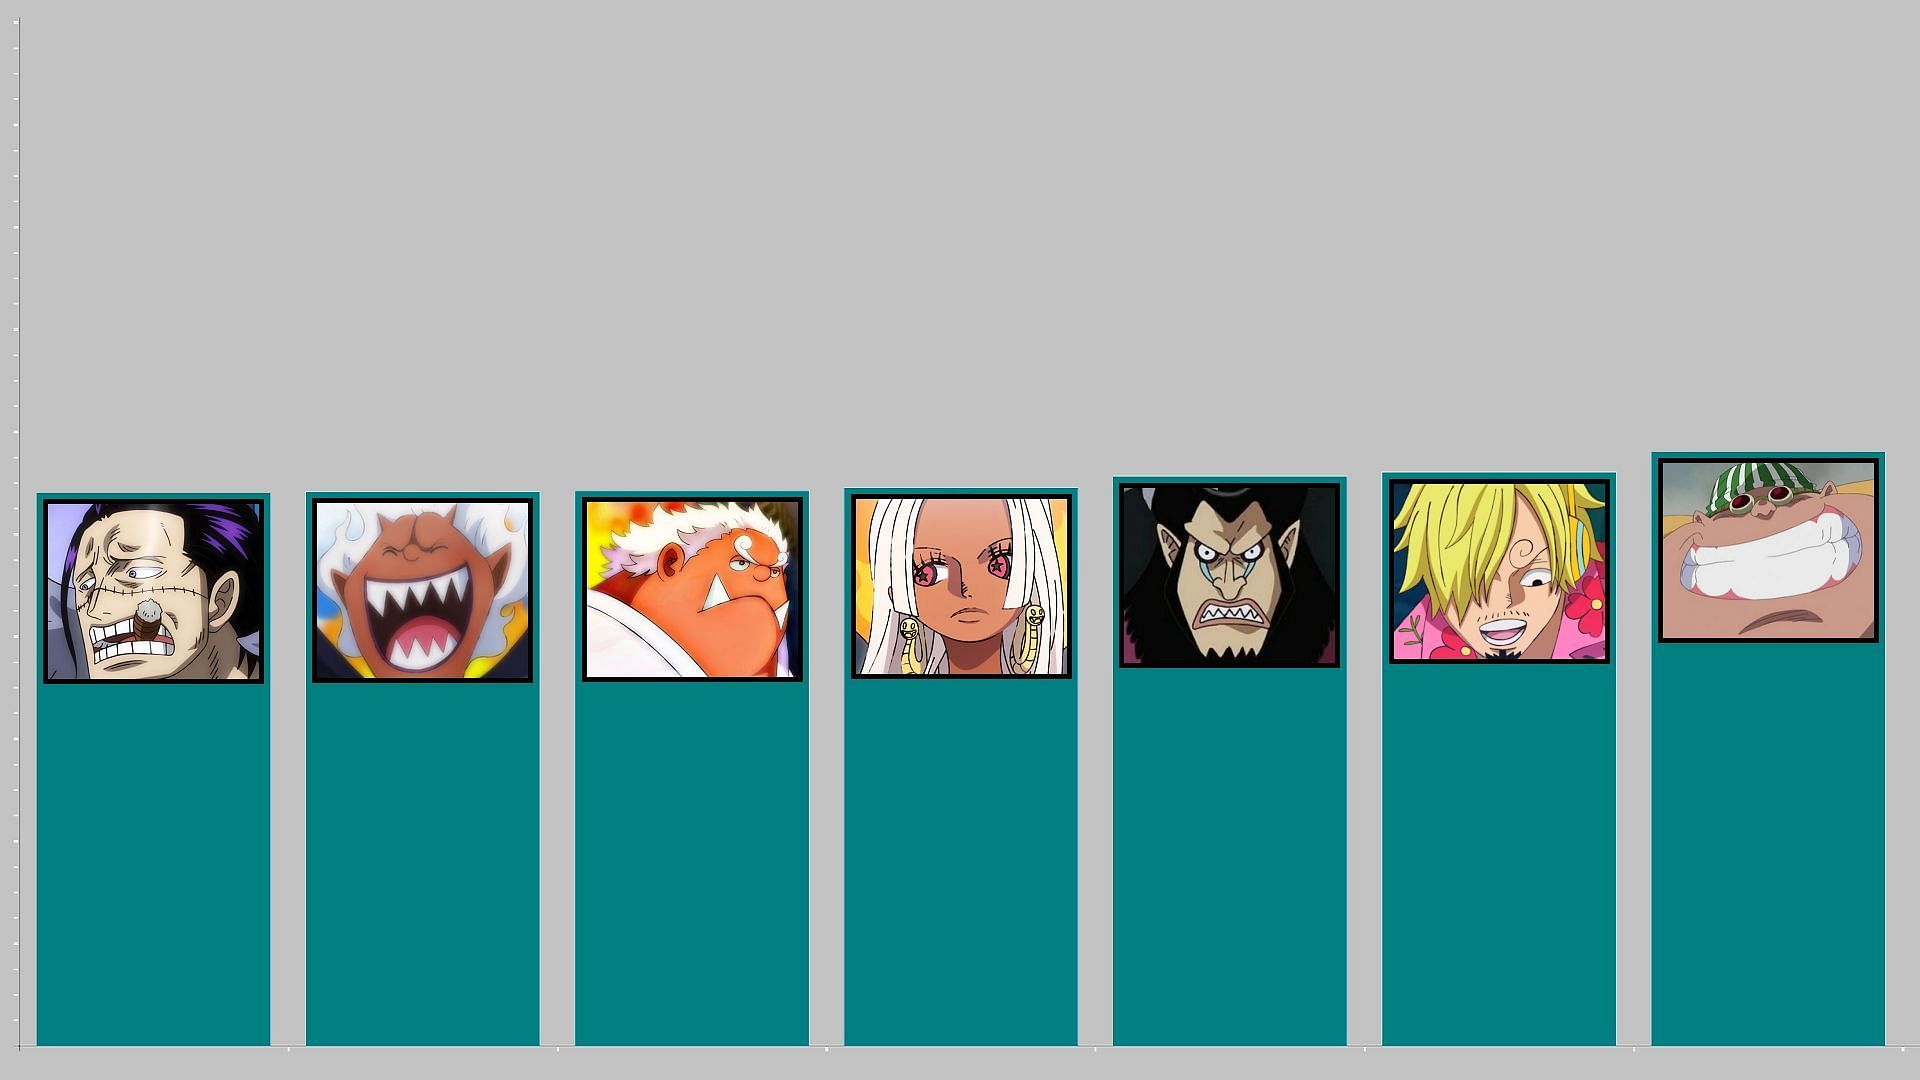 Left to right, positions from 56th to 50th (Image via Toei Animation, One Piece)